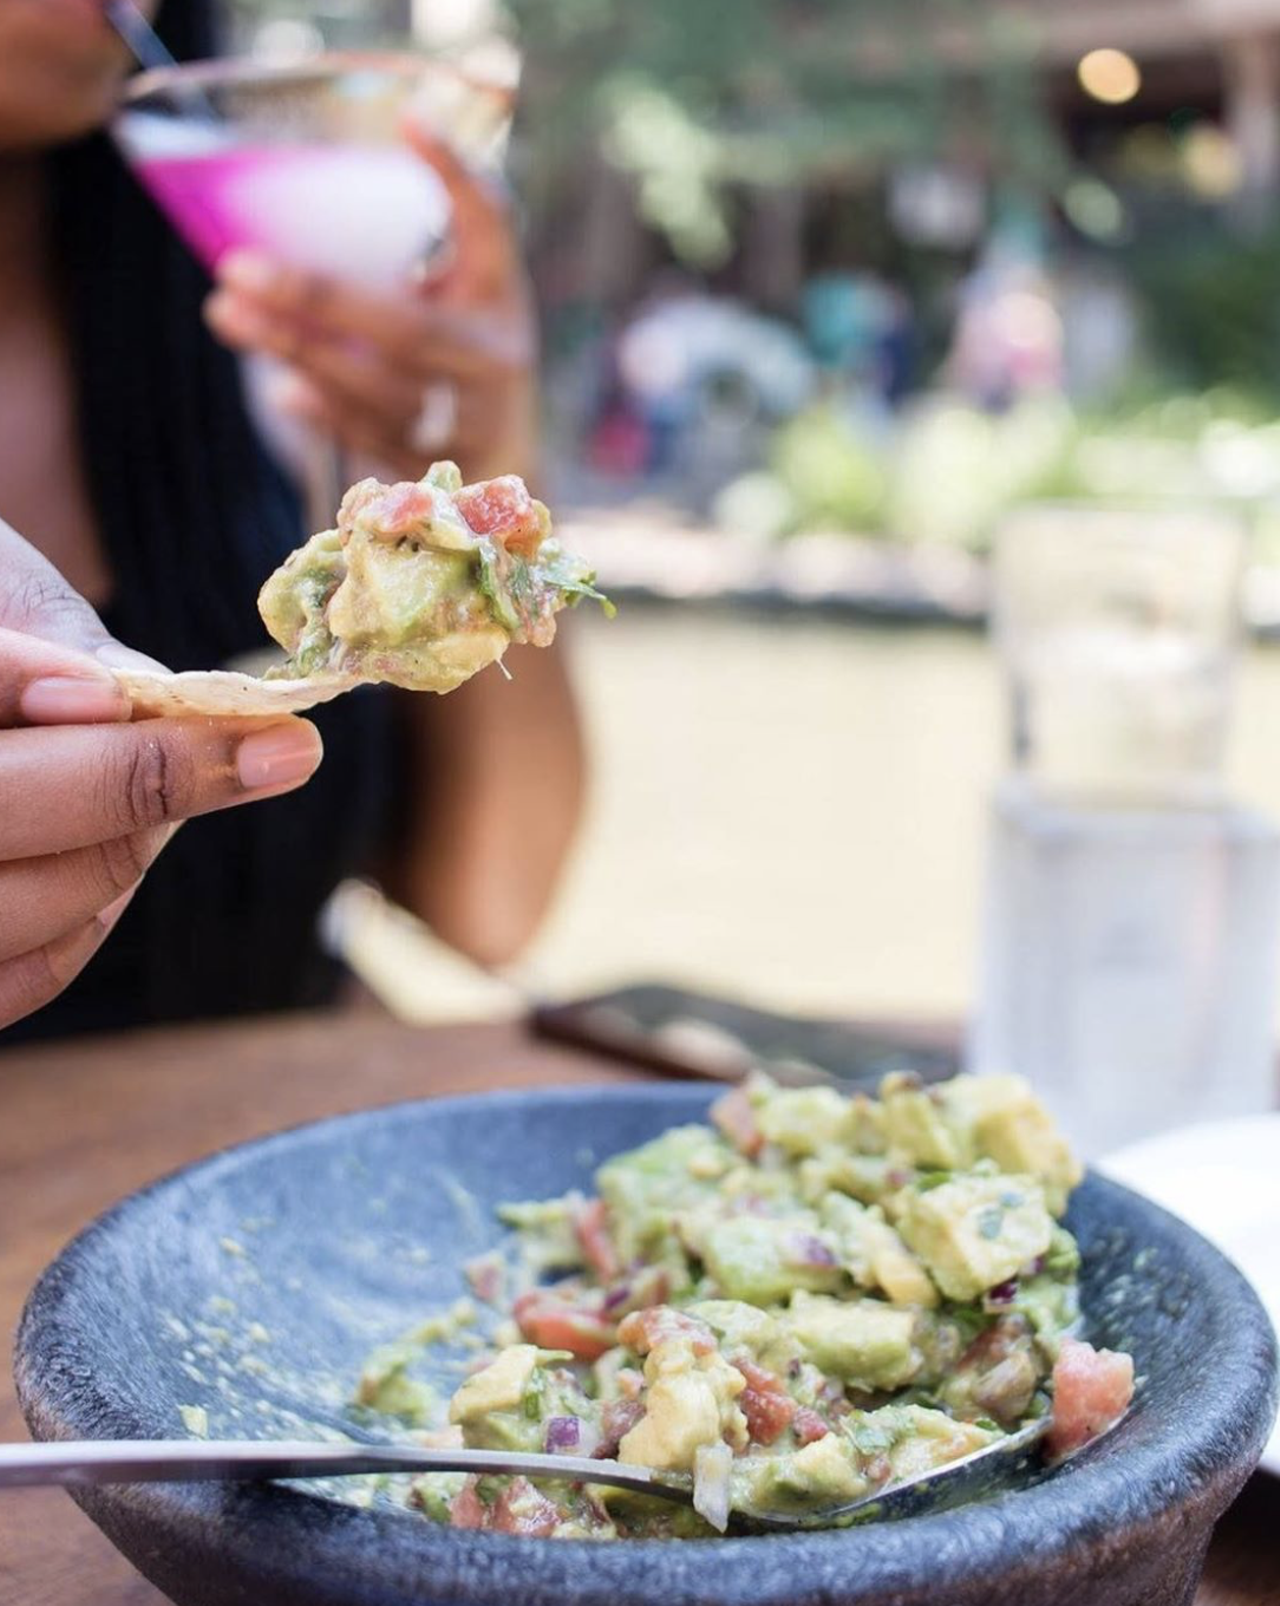 Boudro’s Guacamole
The classic table-side app is easy to prepare at home!
Find the recipe here.
Photo via Instagram /  boudrostexasbistro